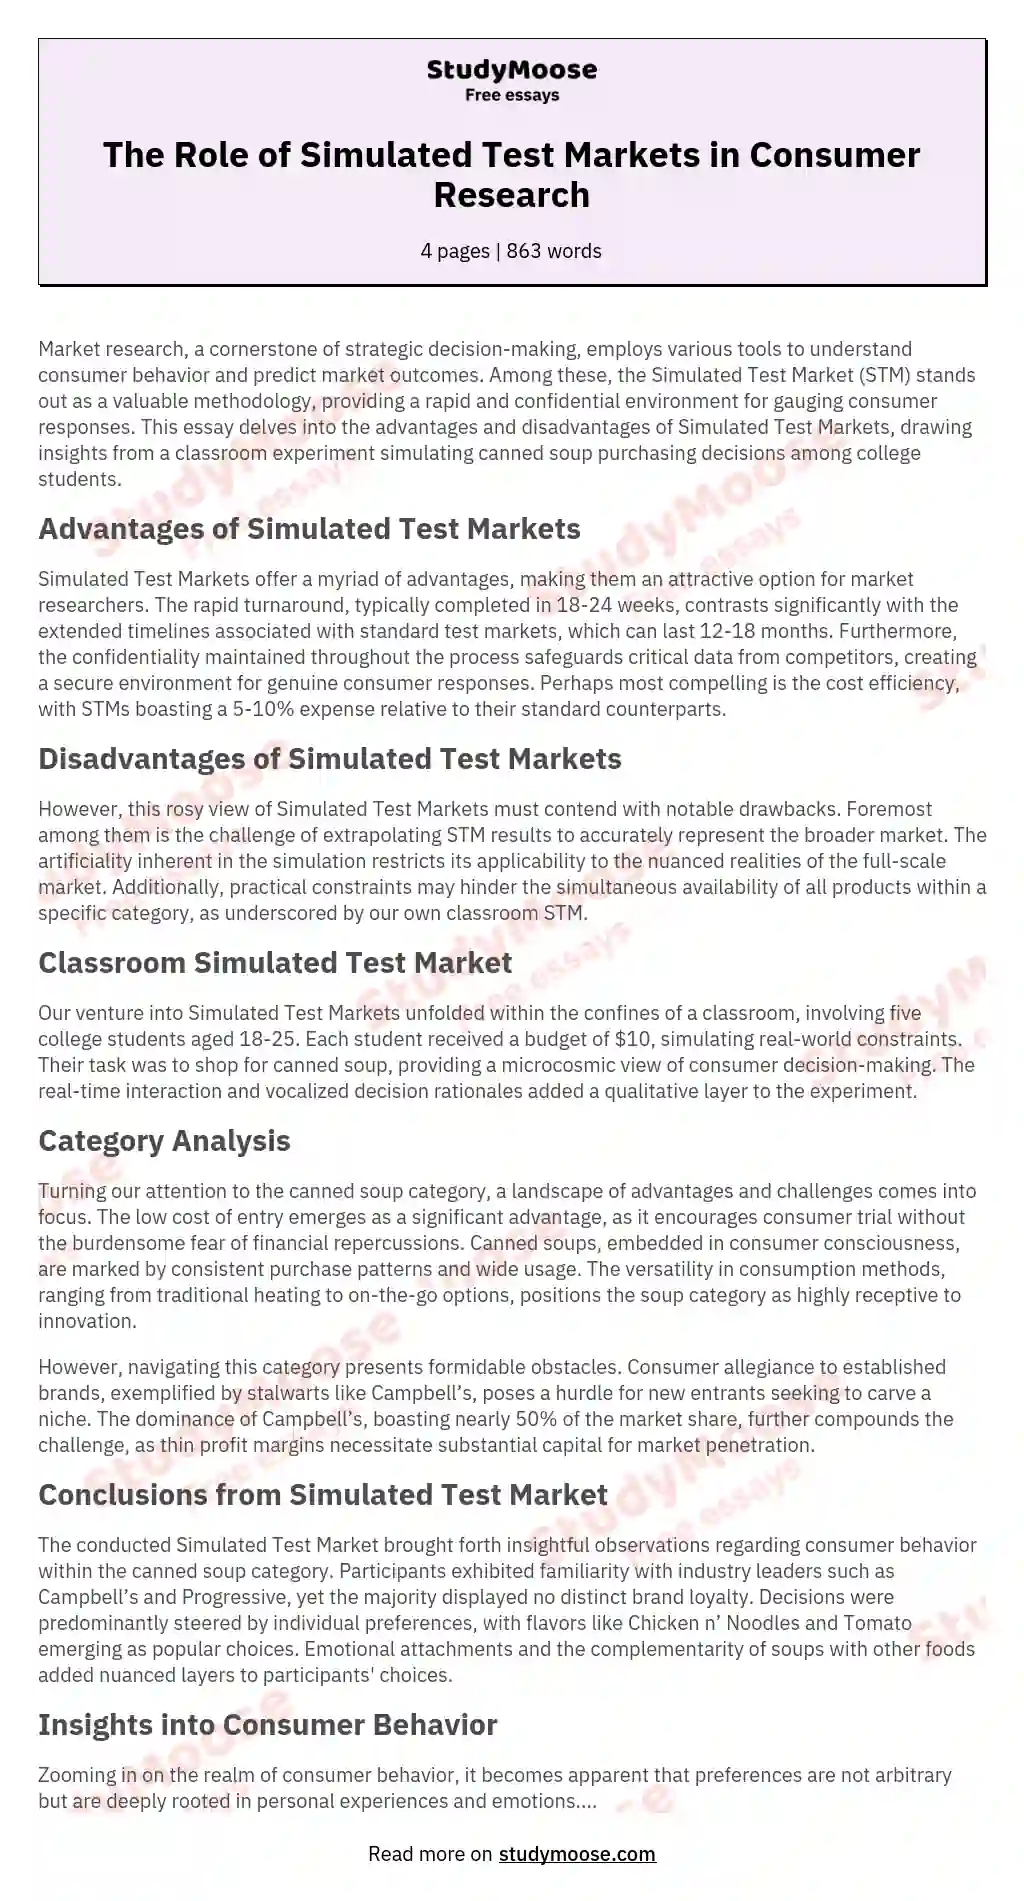 Conducting Simulated Test Market for Marketing Goals